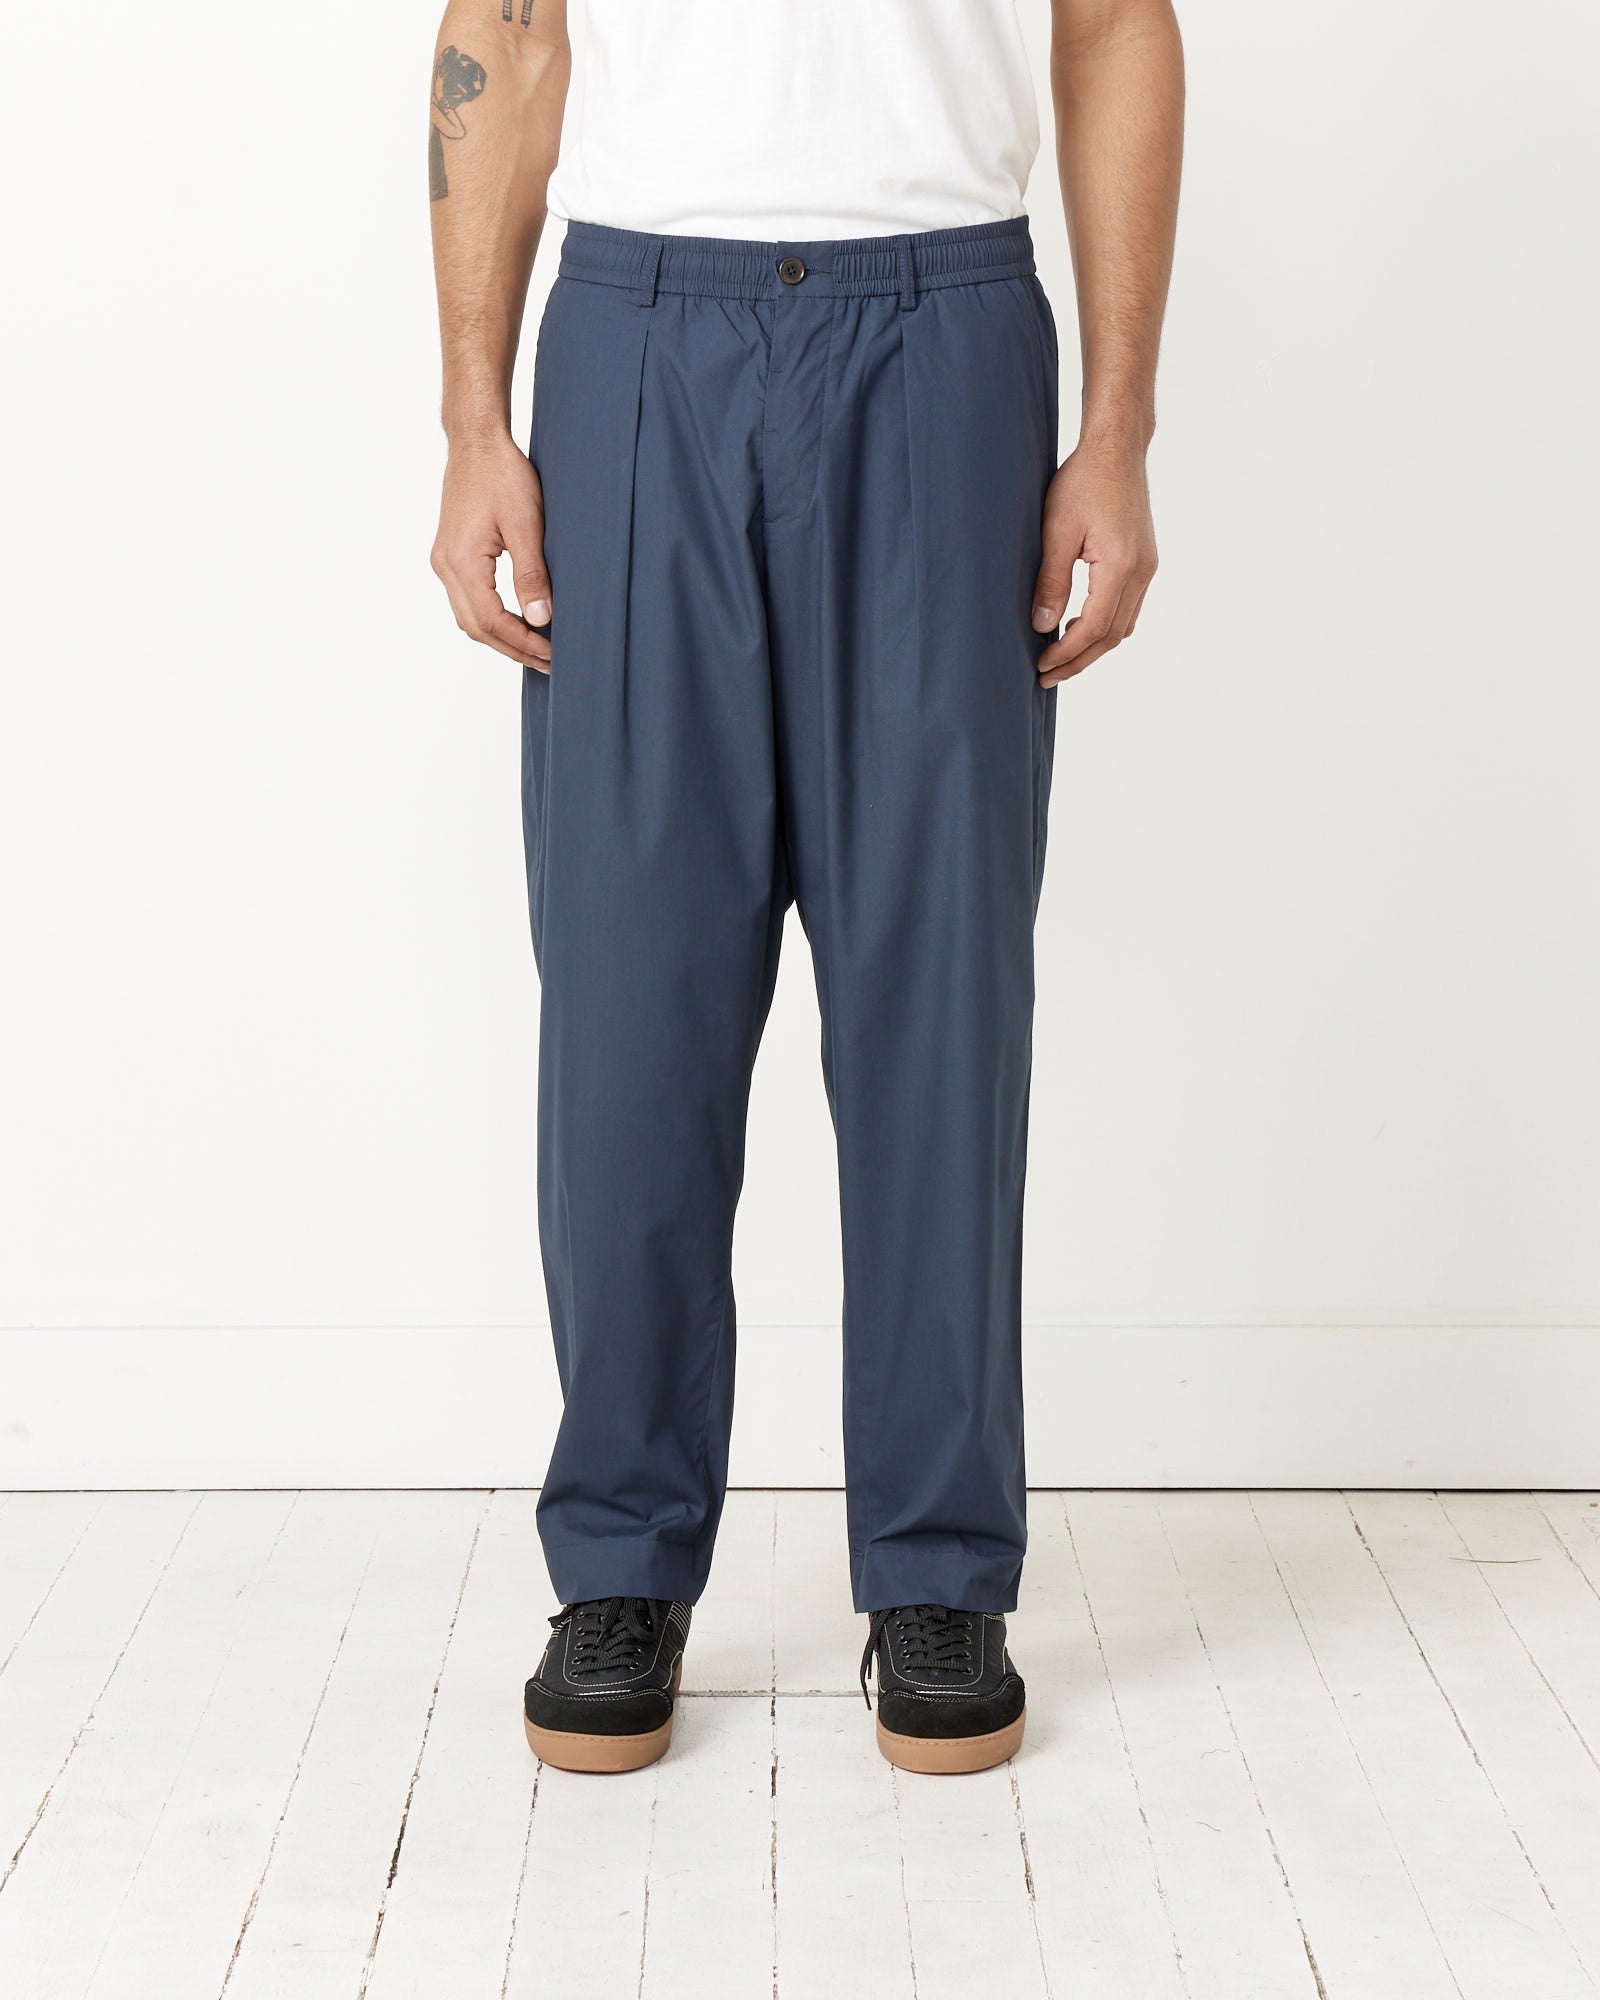 Oxford Pant in Navy